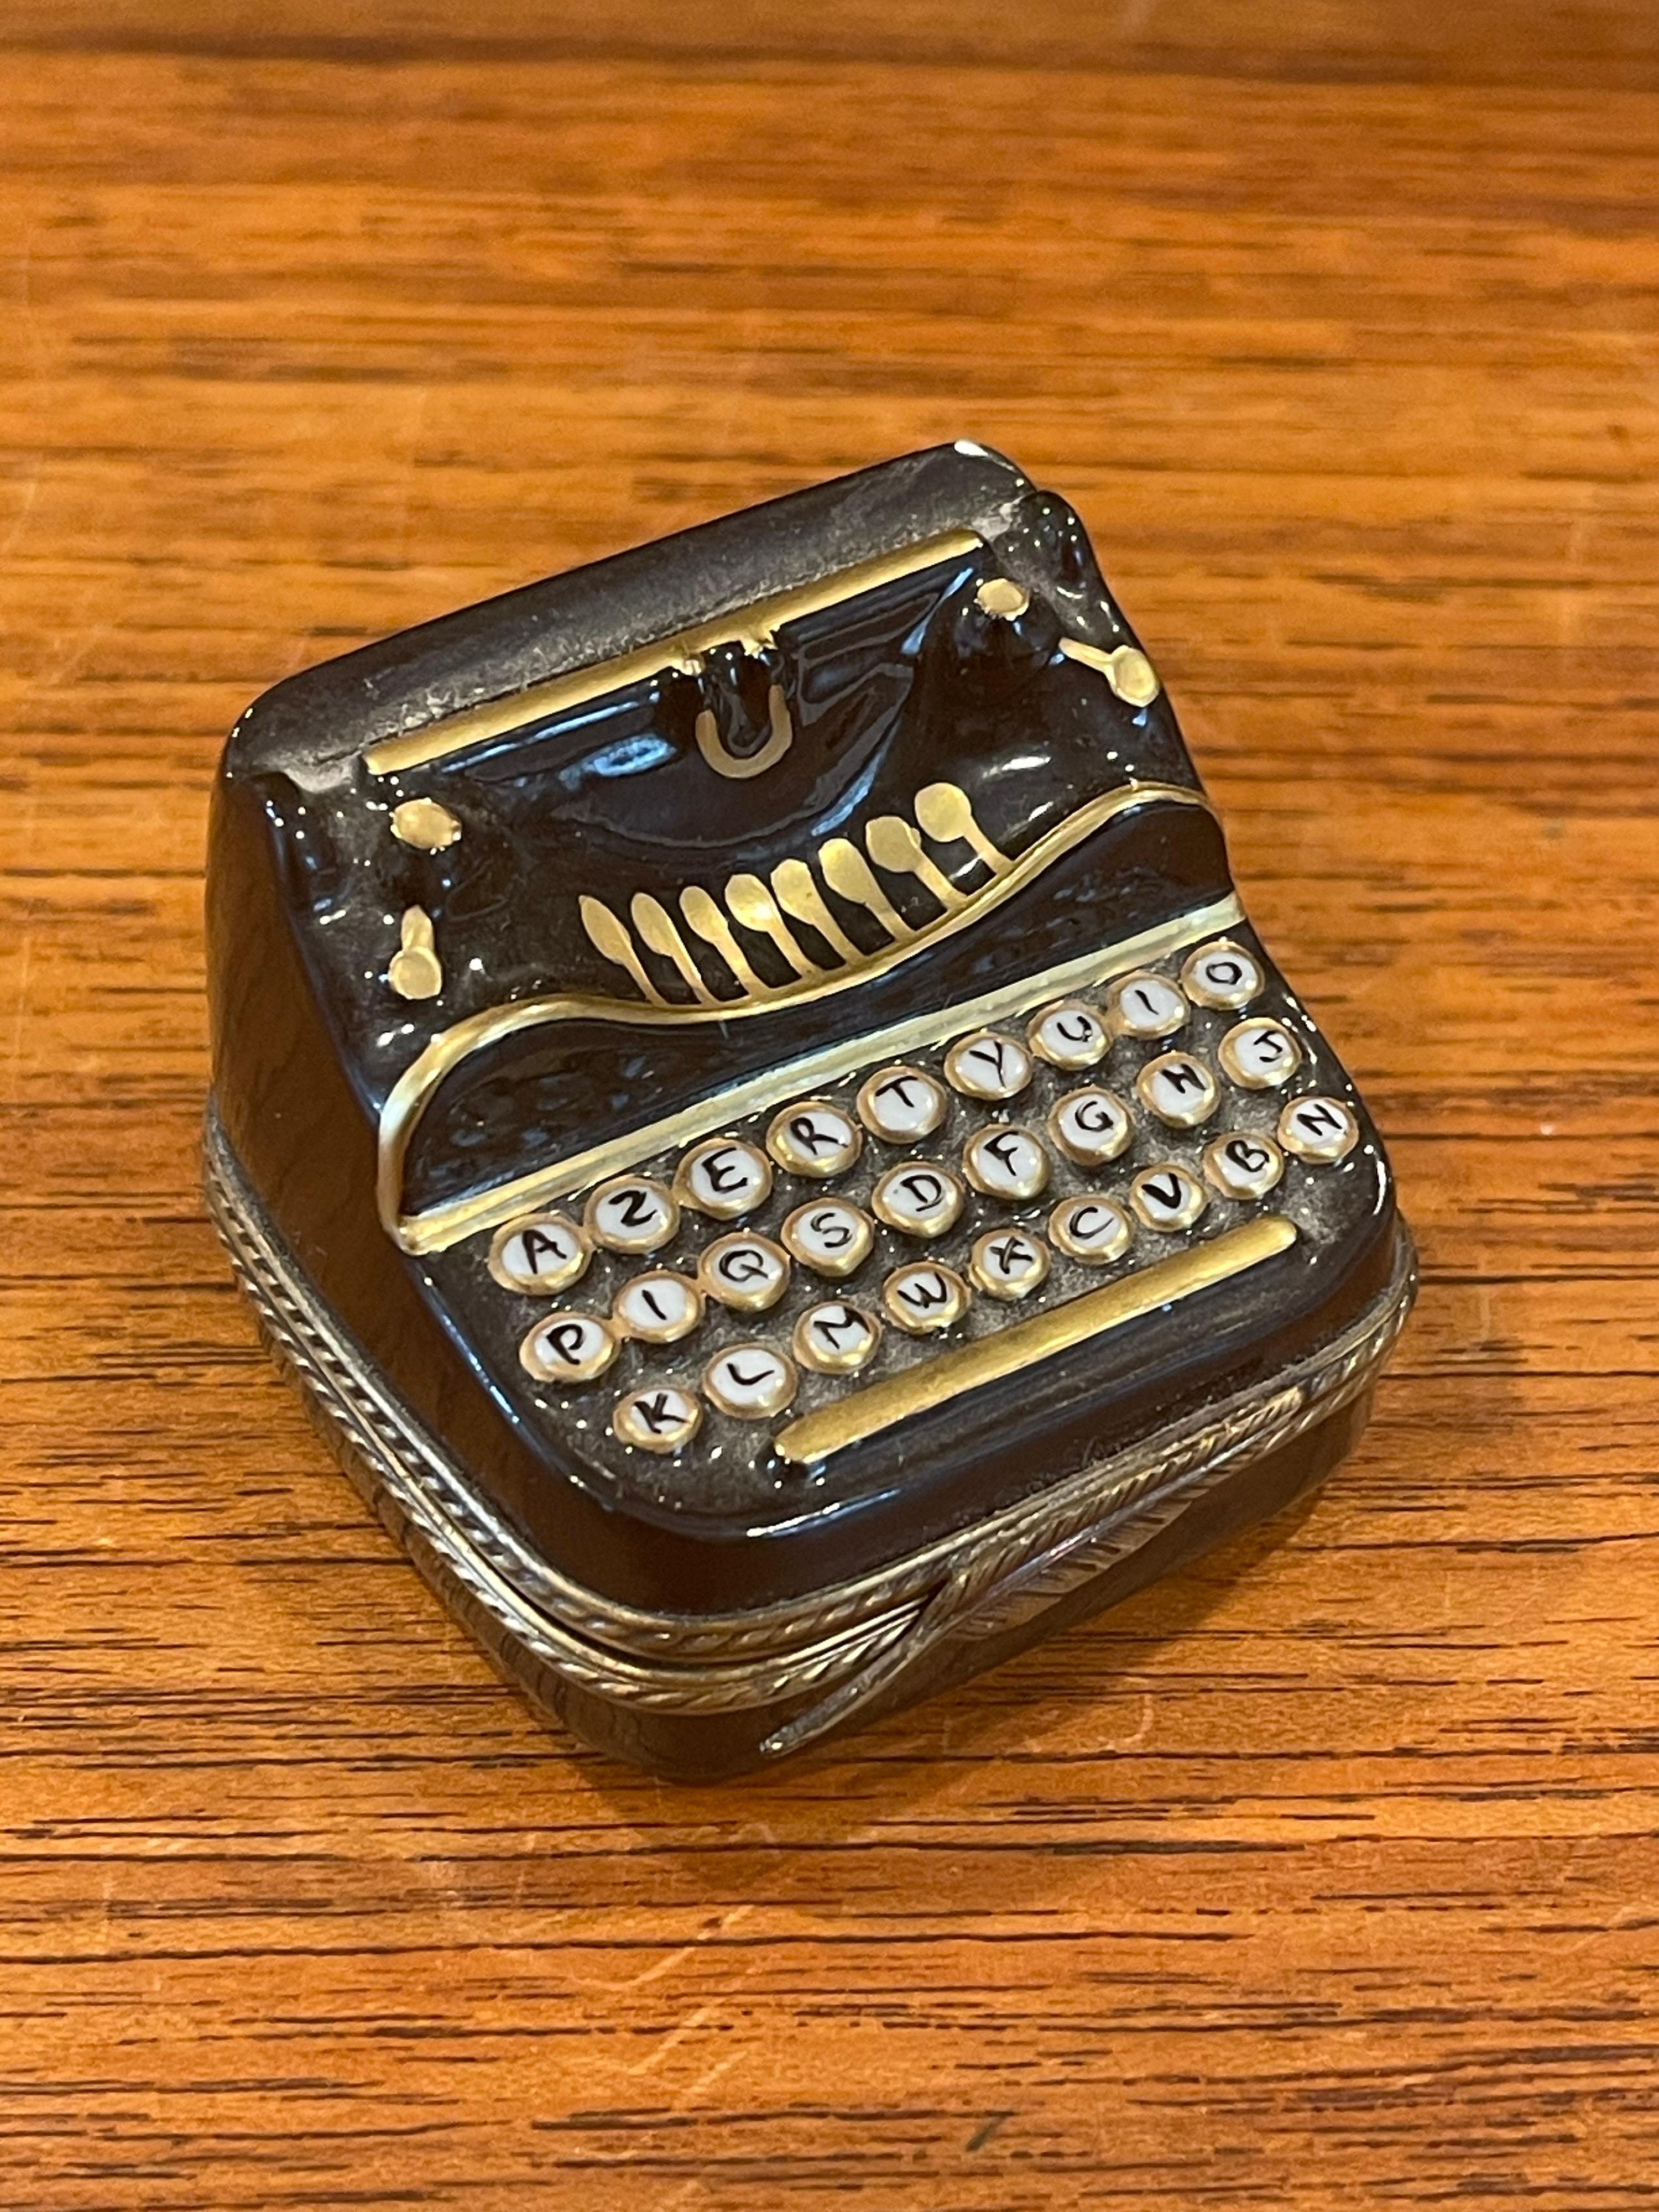 Beautiful porcelain peint main (hand painted) vintage typewriter trinket box by Limoges, circa 1970s. This unusual piece is in very good vintage condition and measures 2